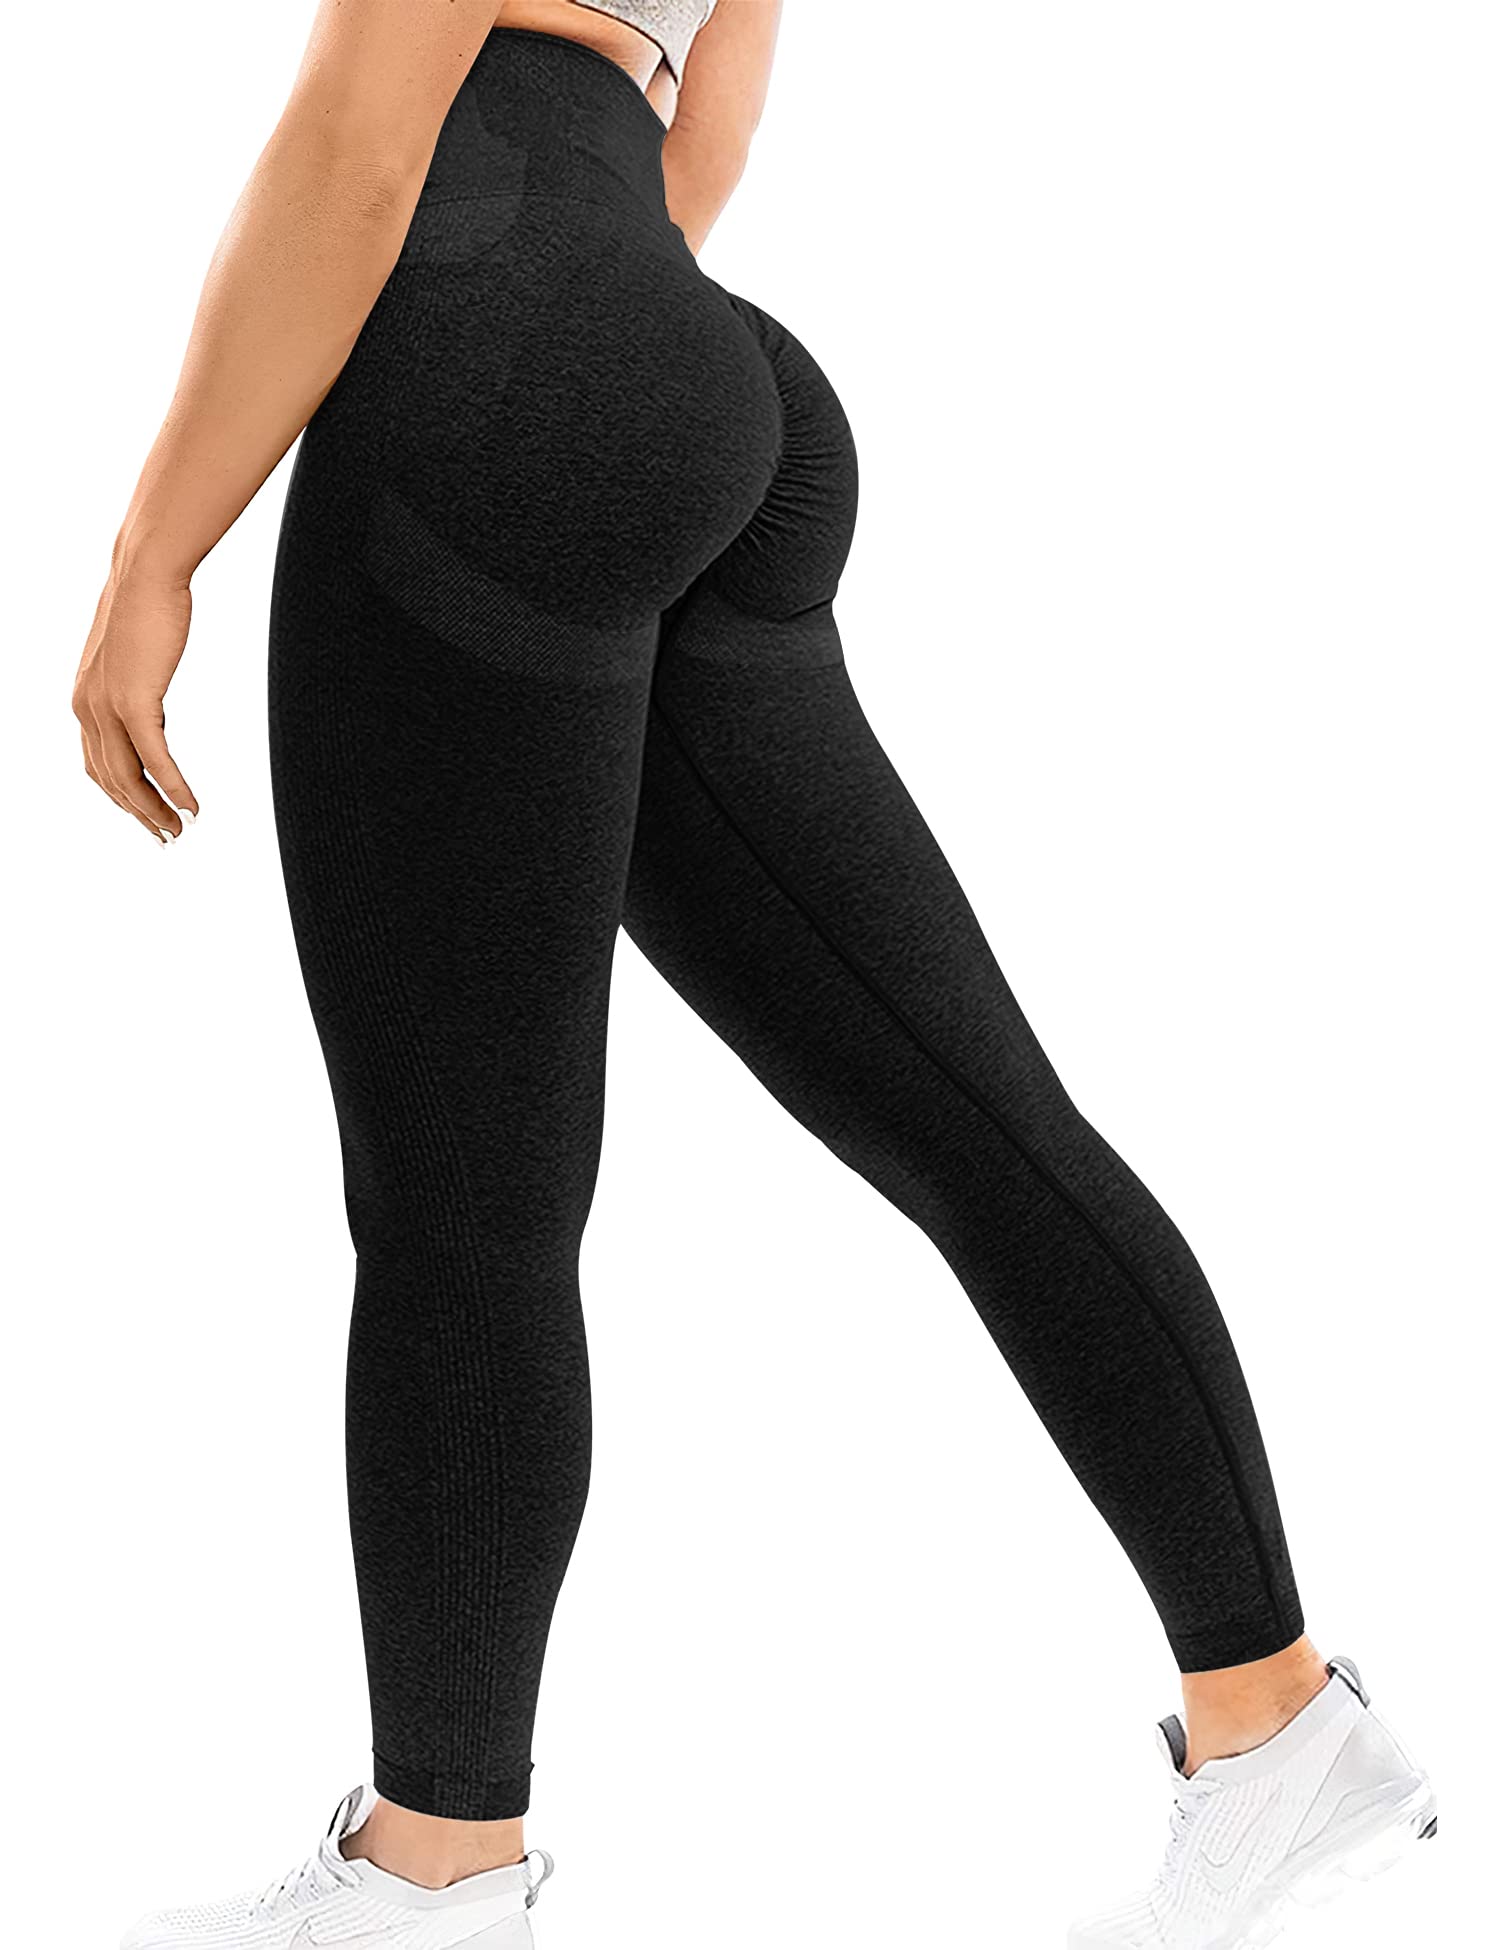 YEOREO Scrunch Butt Lift Leggings for Women Workout Yoga Pants Ruched Booty  High Waist Seamless Leggings Compression Tights #1 Black Medium